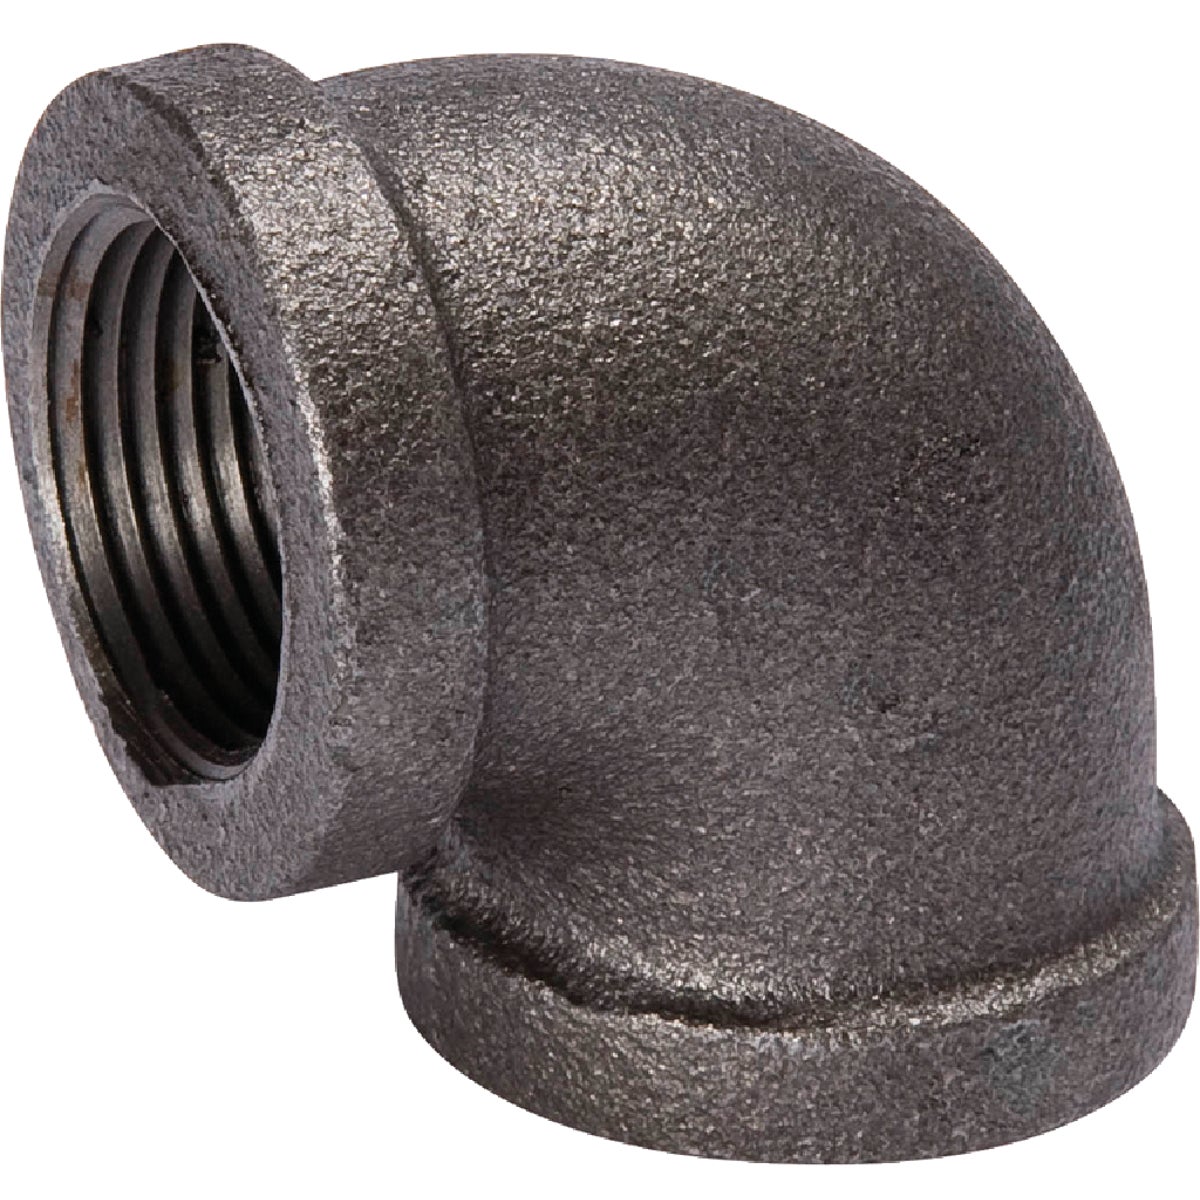 Southland 2 In. 90 Deg. Malleable Black Iron Elbow (1/4 Bend)